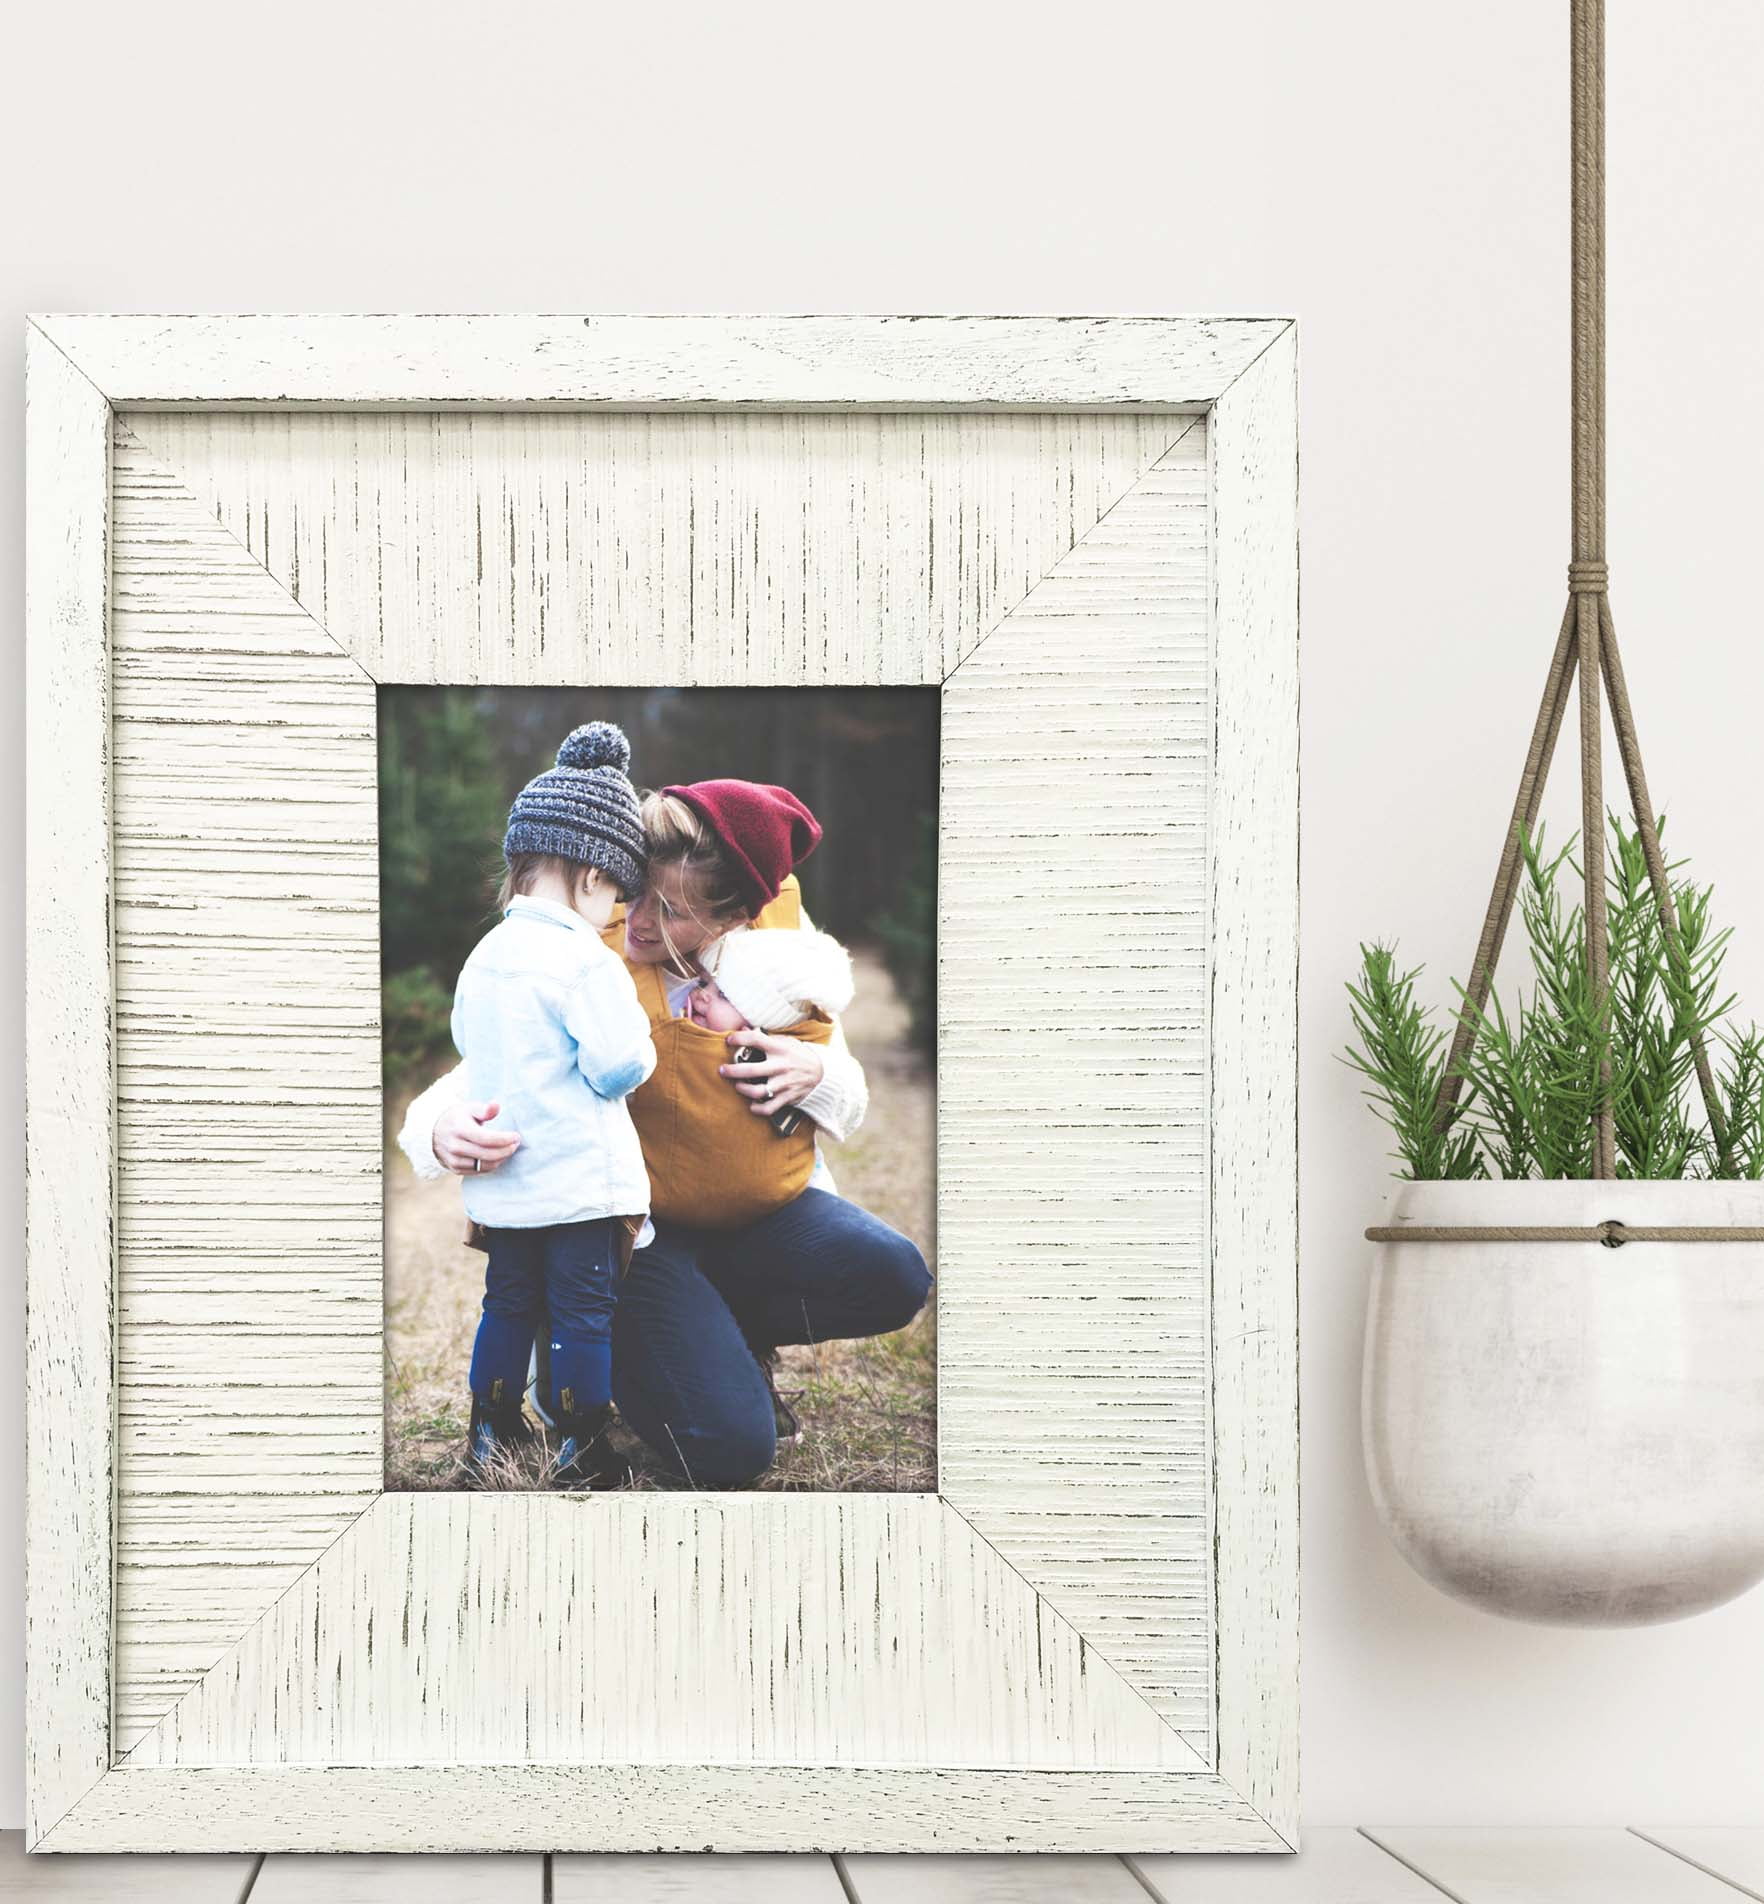 Mainstays 5x7 White Wooden Picture Frame